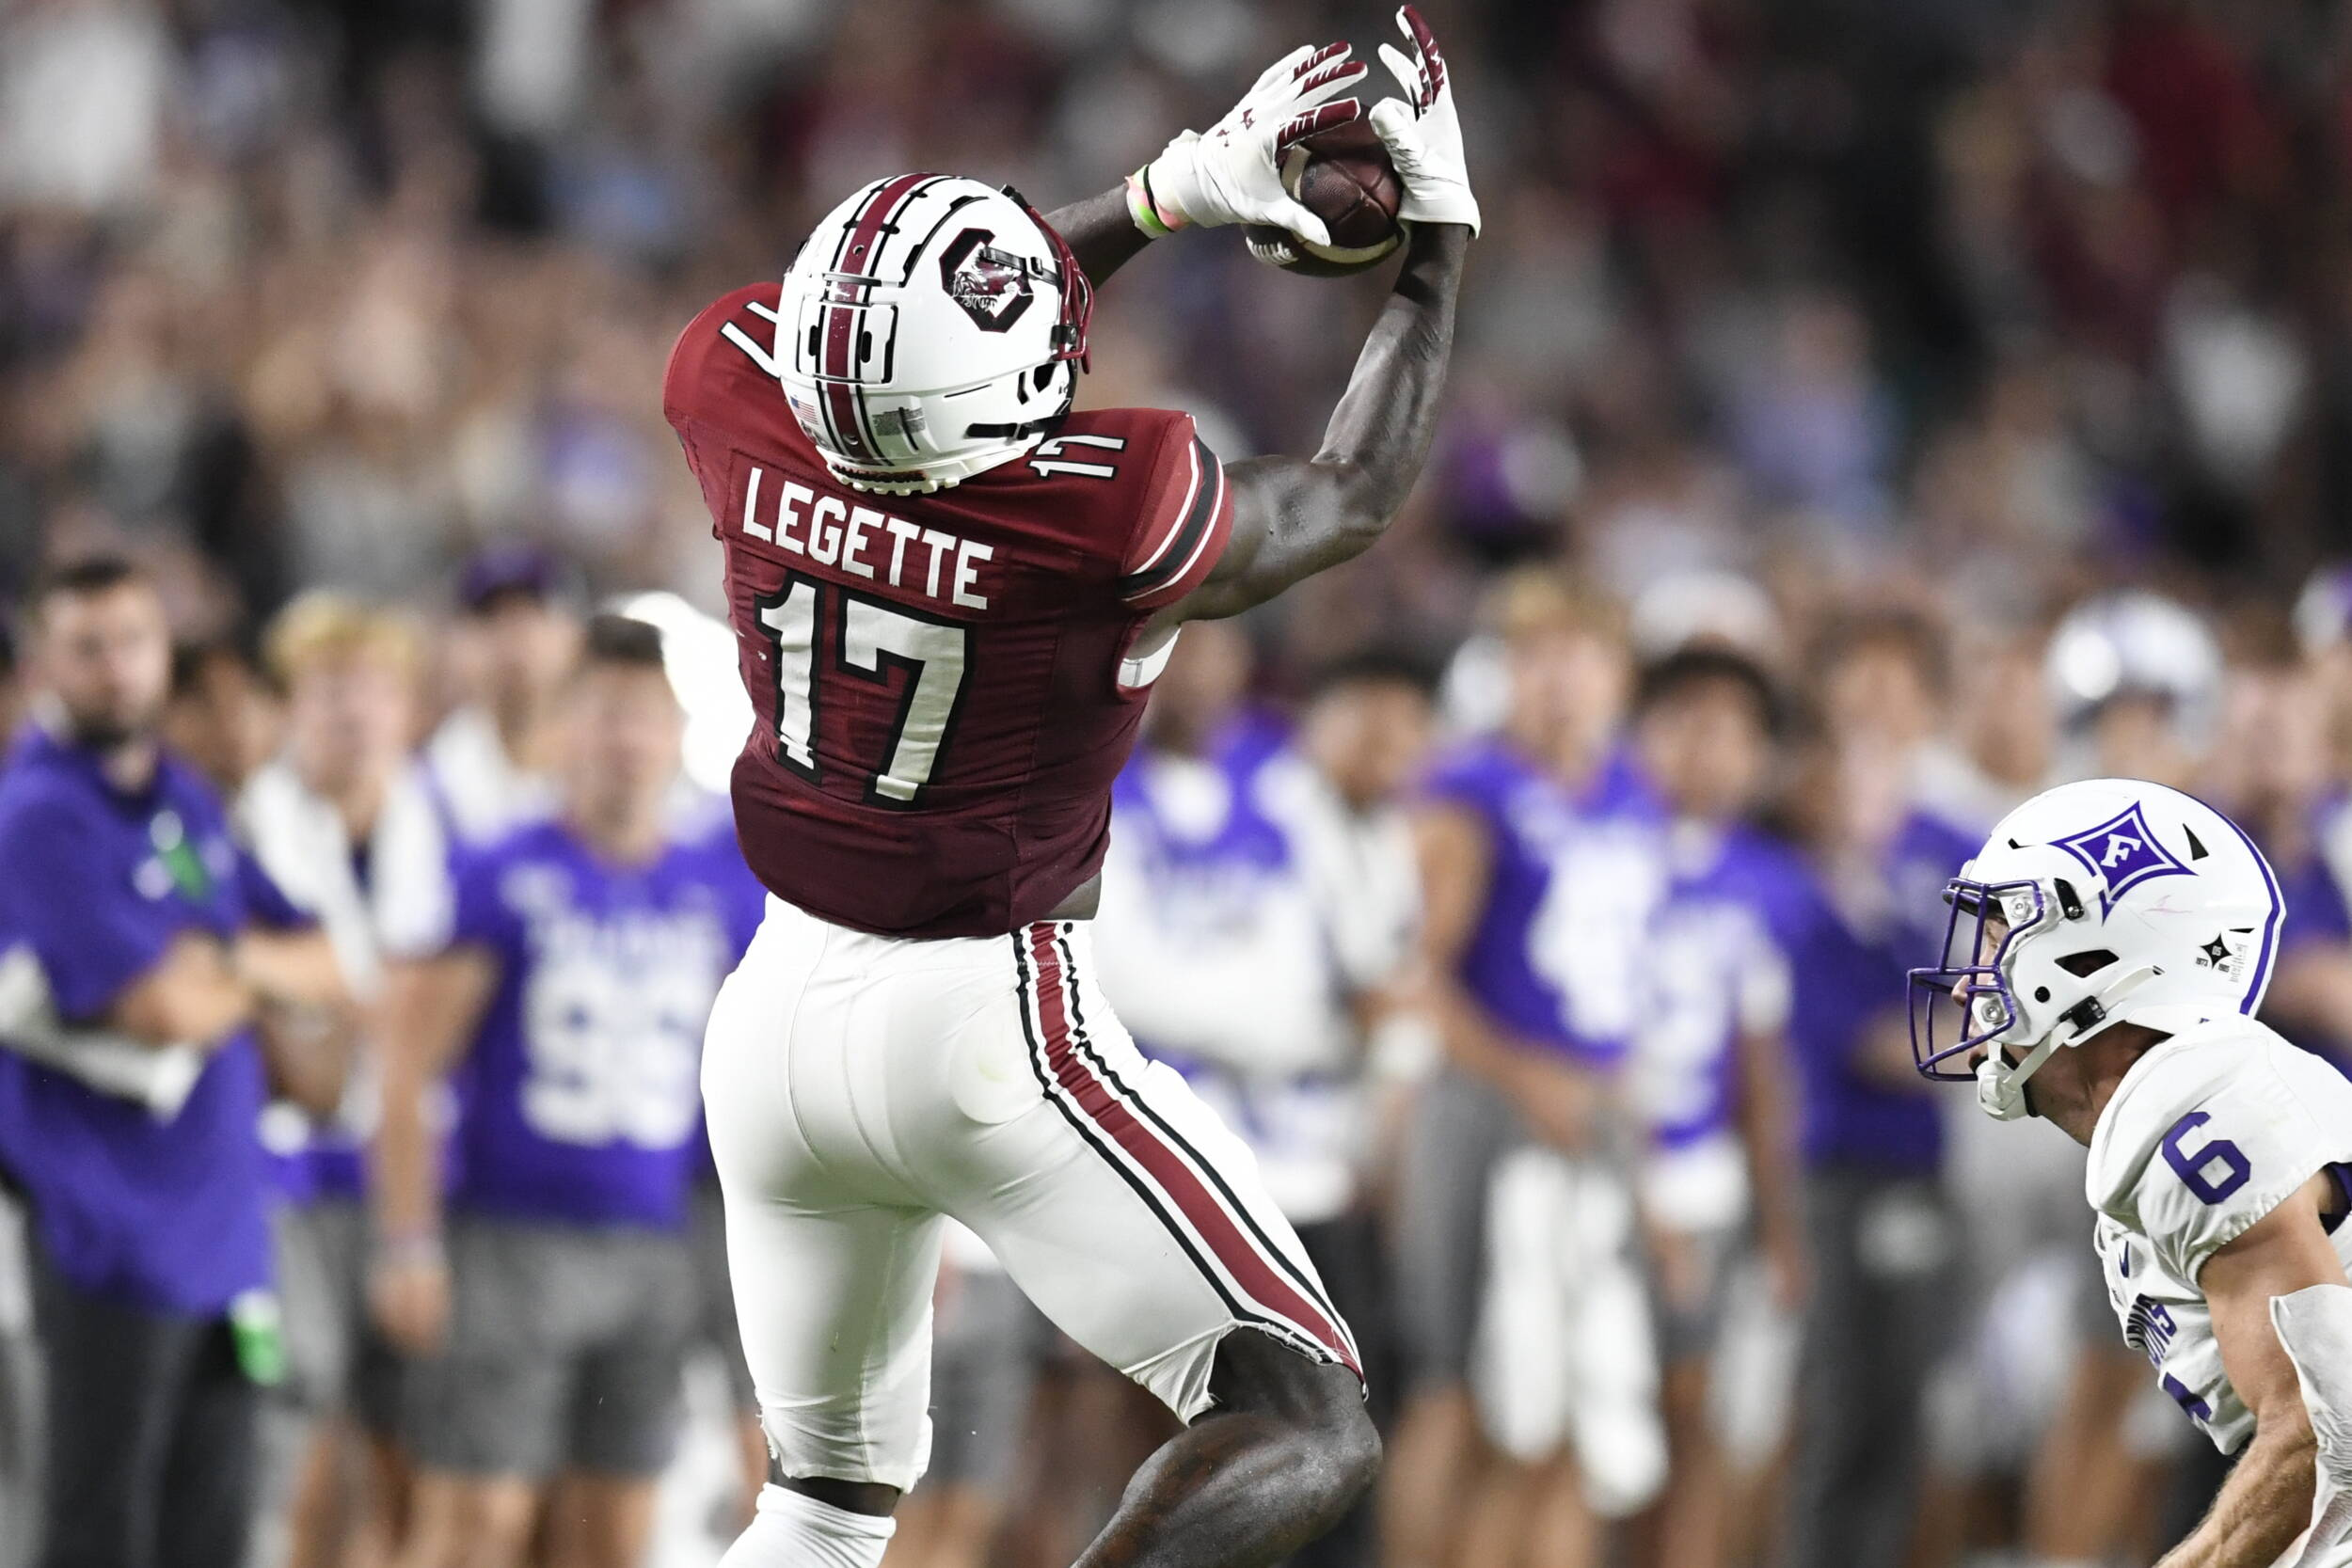 Legette and Williams Earn A.P. Second Team All-SEC Honors